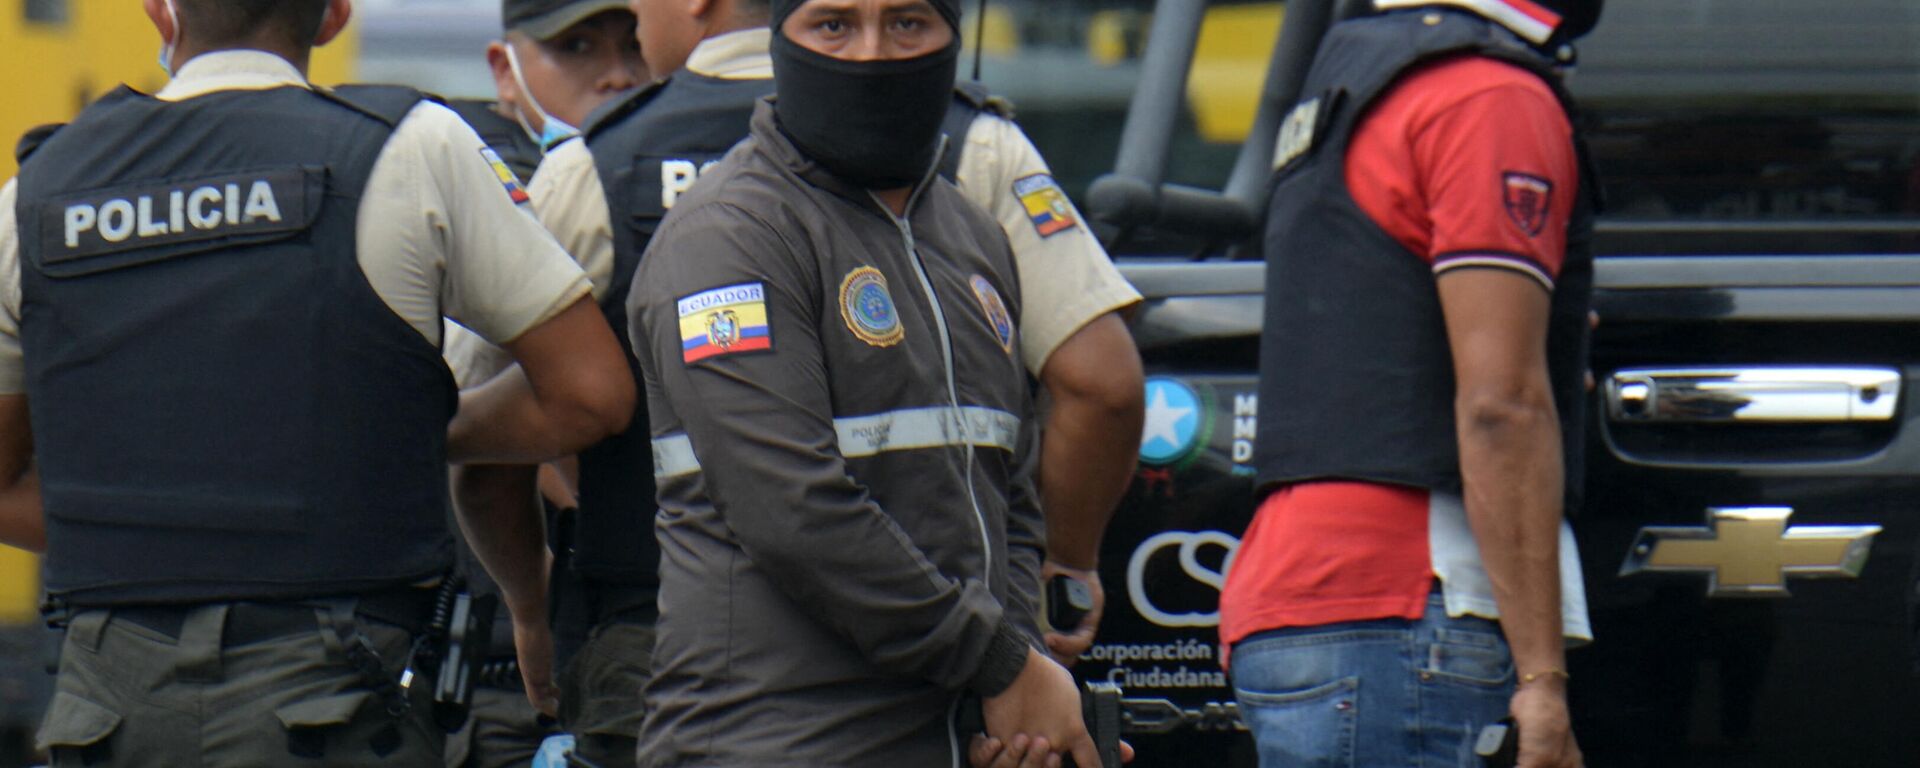 Ecuadorean police members take position outside the premises of Ecuador's TC television channel after unidentified gunmen burst into the state-owned television studio live on air on January 9, 2024, in Guayaquil, Ecuador, a day after Ecuadorean President Daniel Noboa declared a state of emergency following the escape from prison of a dangerous narco boss. Gunshots rang out on live TV in violence-torn Ecuador as armed men carrying rifles and grenades stormed the studio shortly after gangsters vowed a war against the president's plans to reclaim control from narcoterrorists. - Sputnik International, 1920, 09.01.2024